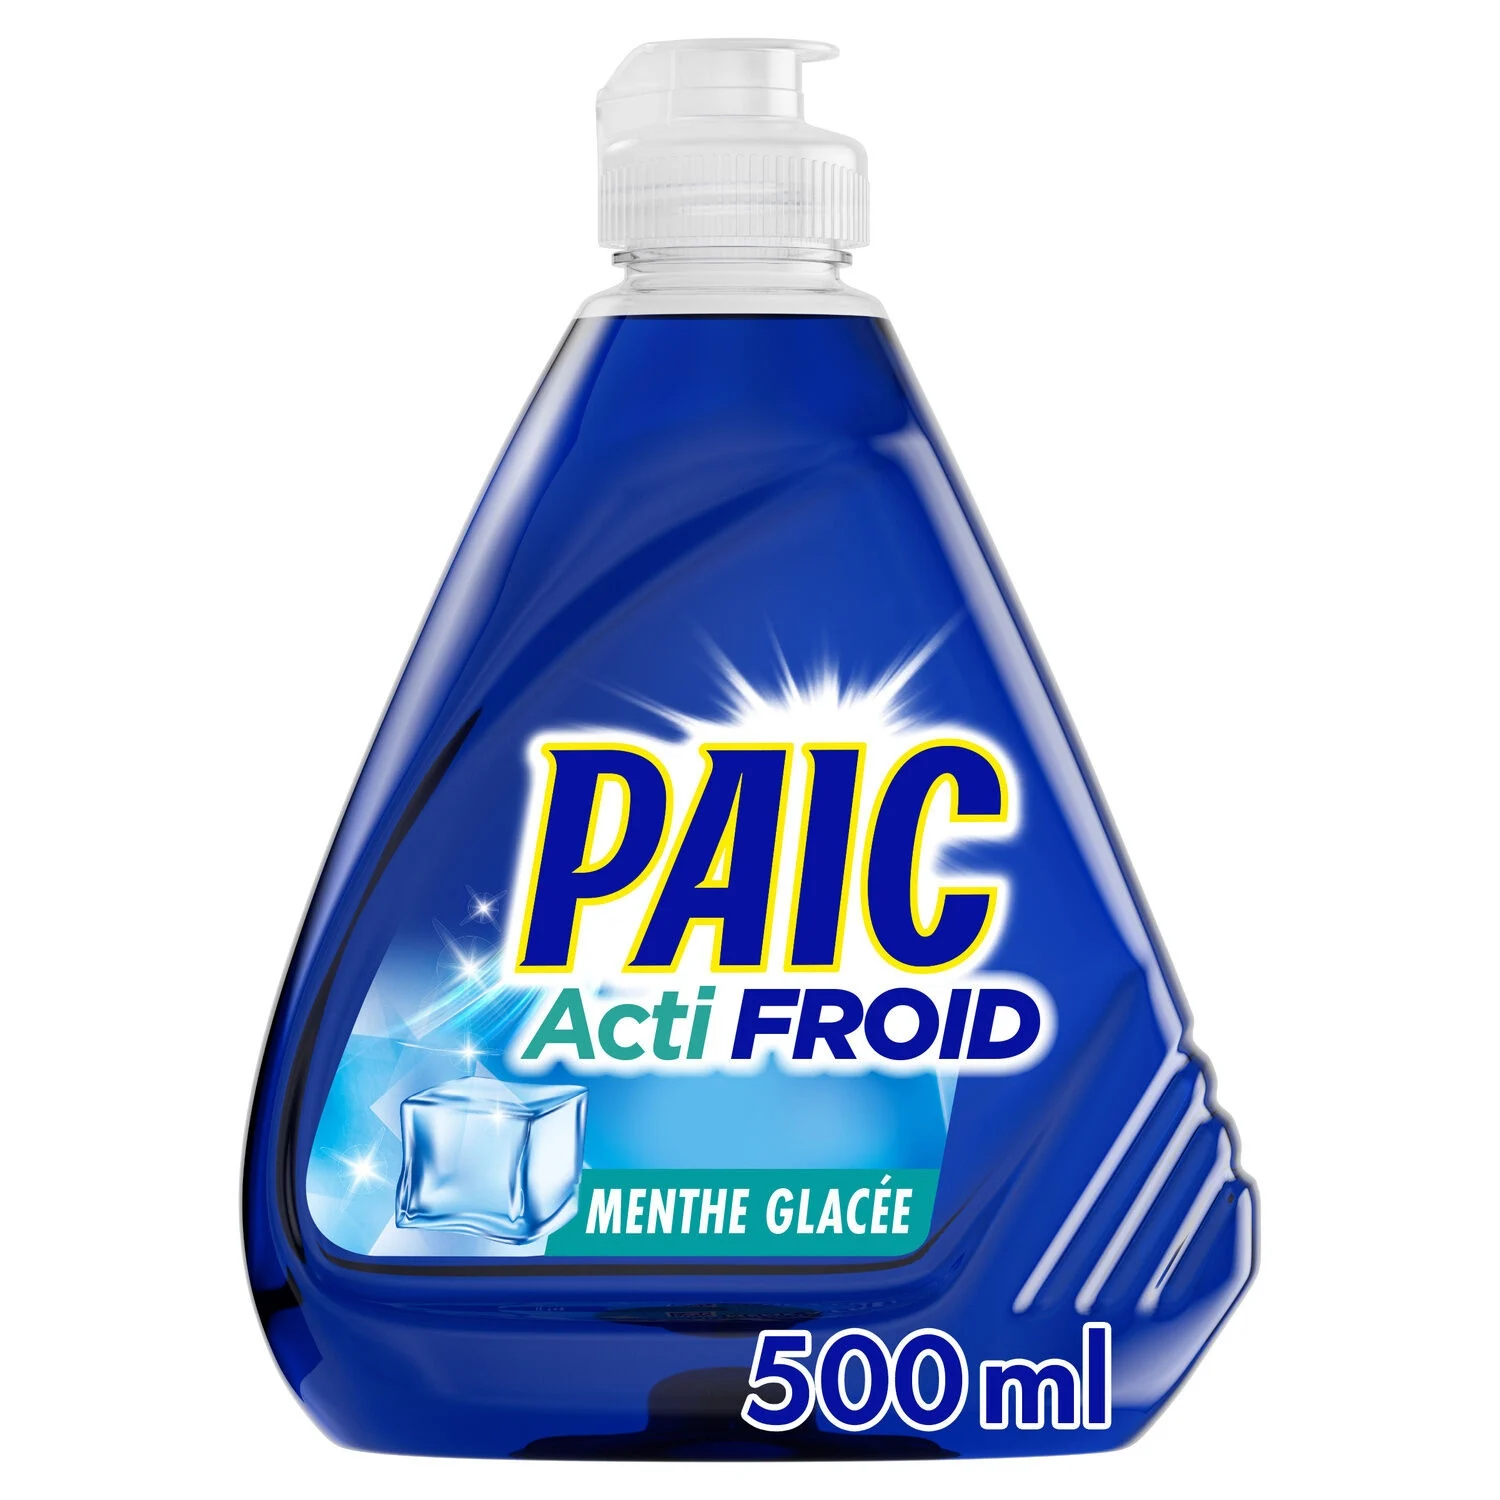 Paic Actifroid Menthe Glacee 5